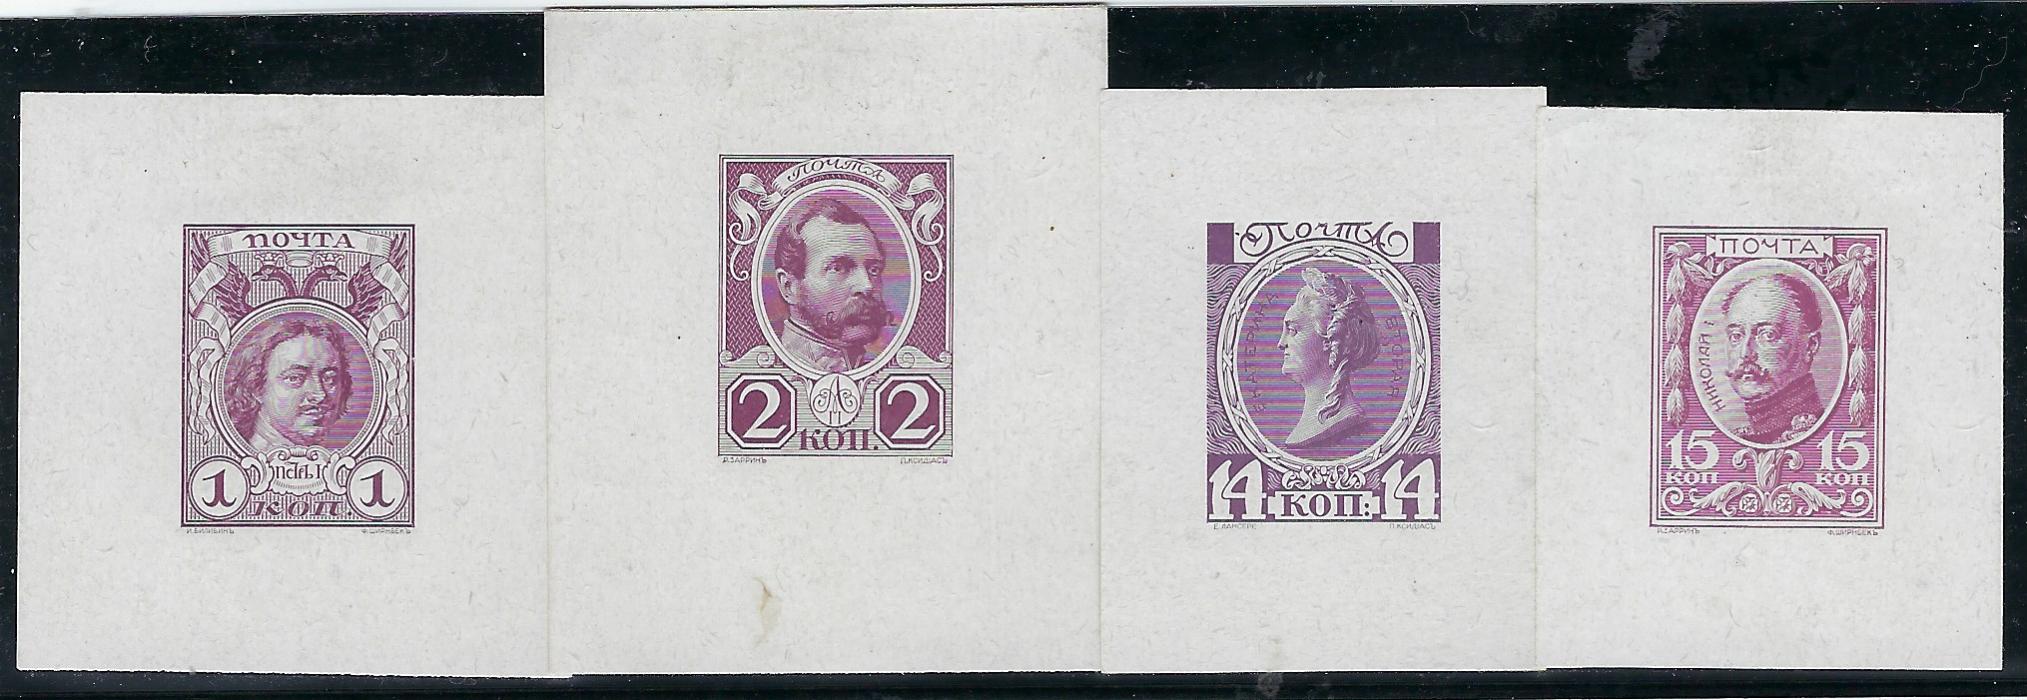 Russia 1913 Romanov Tercentenary group of eight proofs in purple shades on chalk surfaced paper, with the name of designer and engraver beneath the image, including 1k, 2k, 14k, 15k, 20k, 25k, 35k and 70k values, odd insignificant thin, the majority described at the Tsar Nicholas collection sold at Robson Lowe in 1935, published in Yamchik-Postal Rider 1983, No 12, pages 12 to 15; a rare assembly.